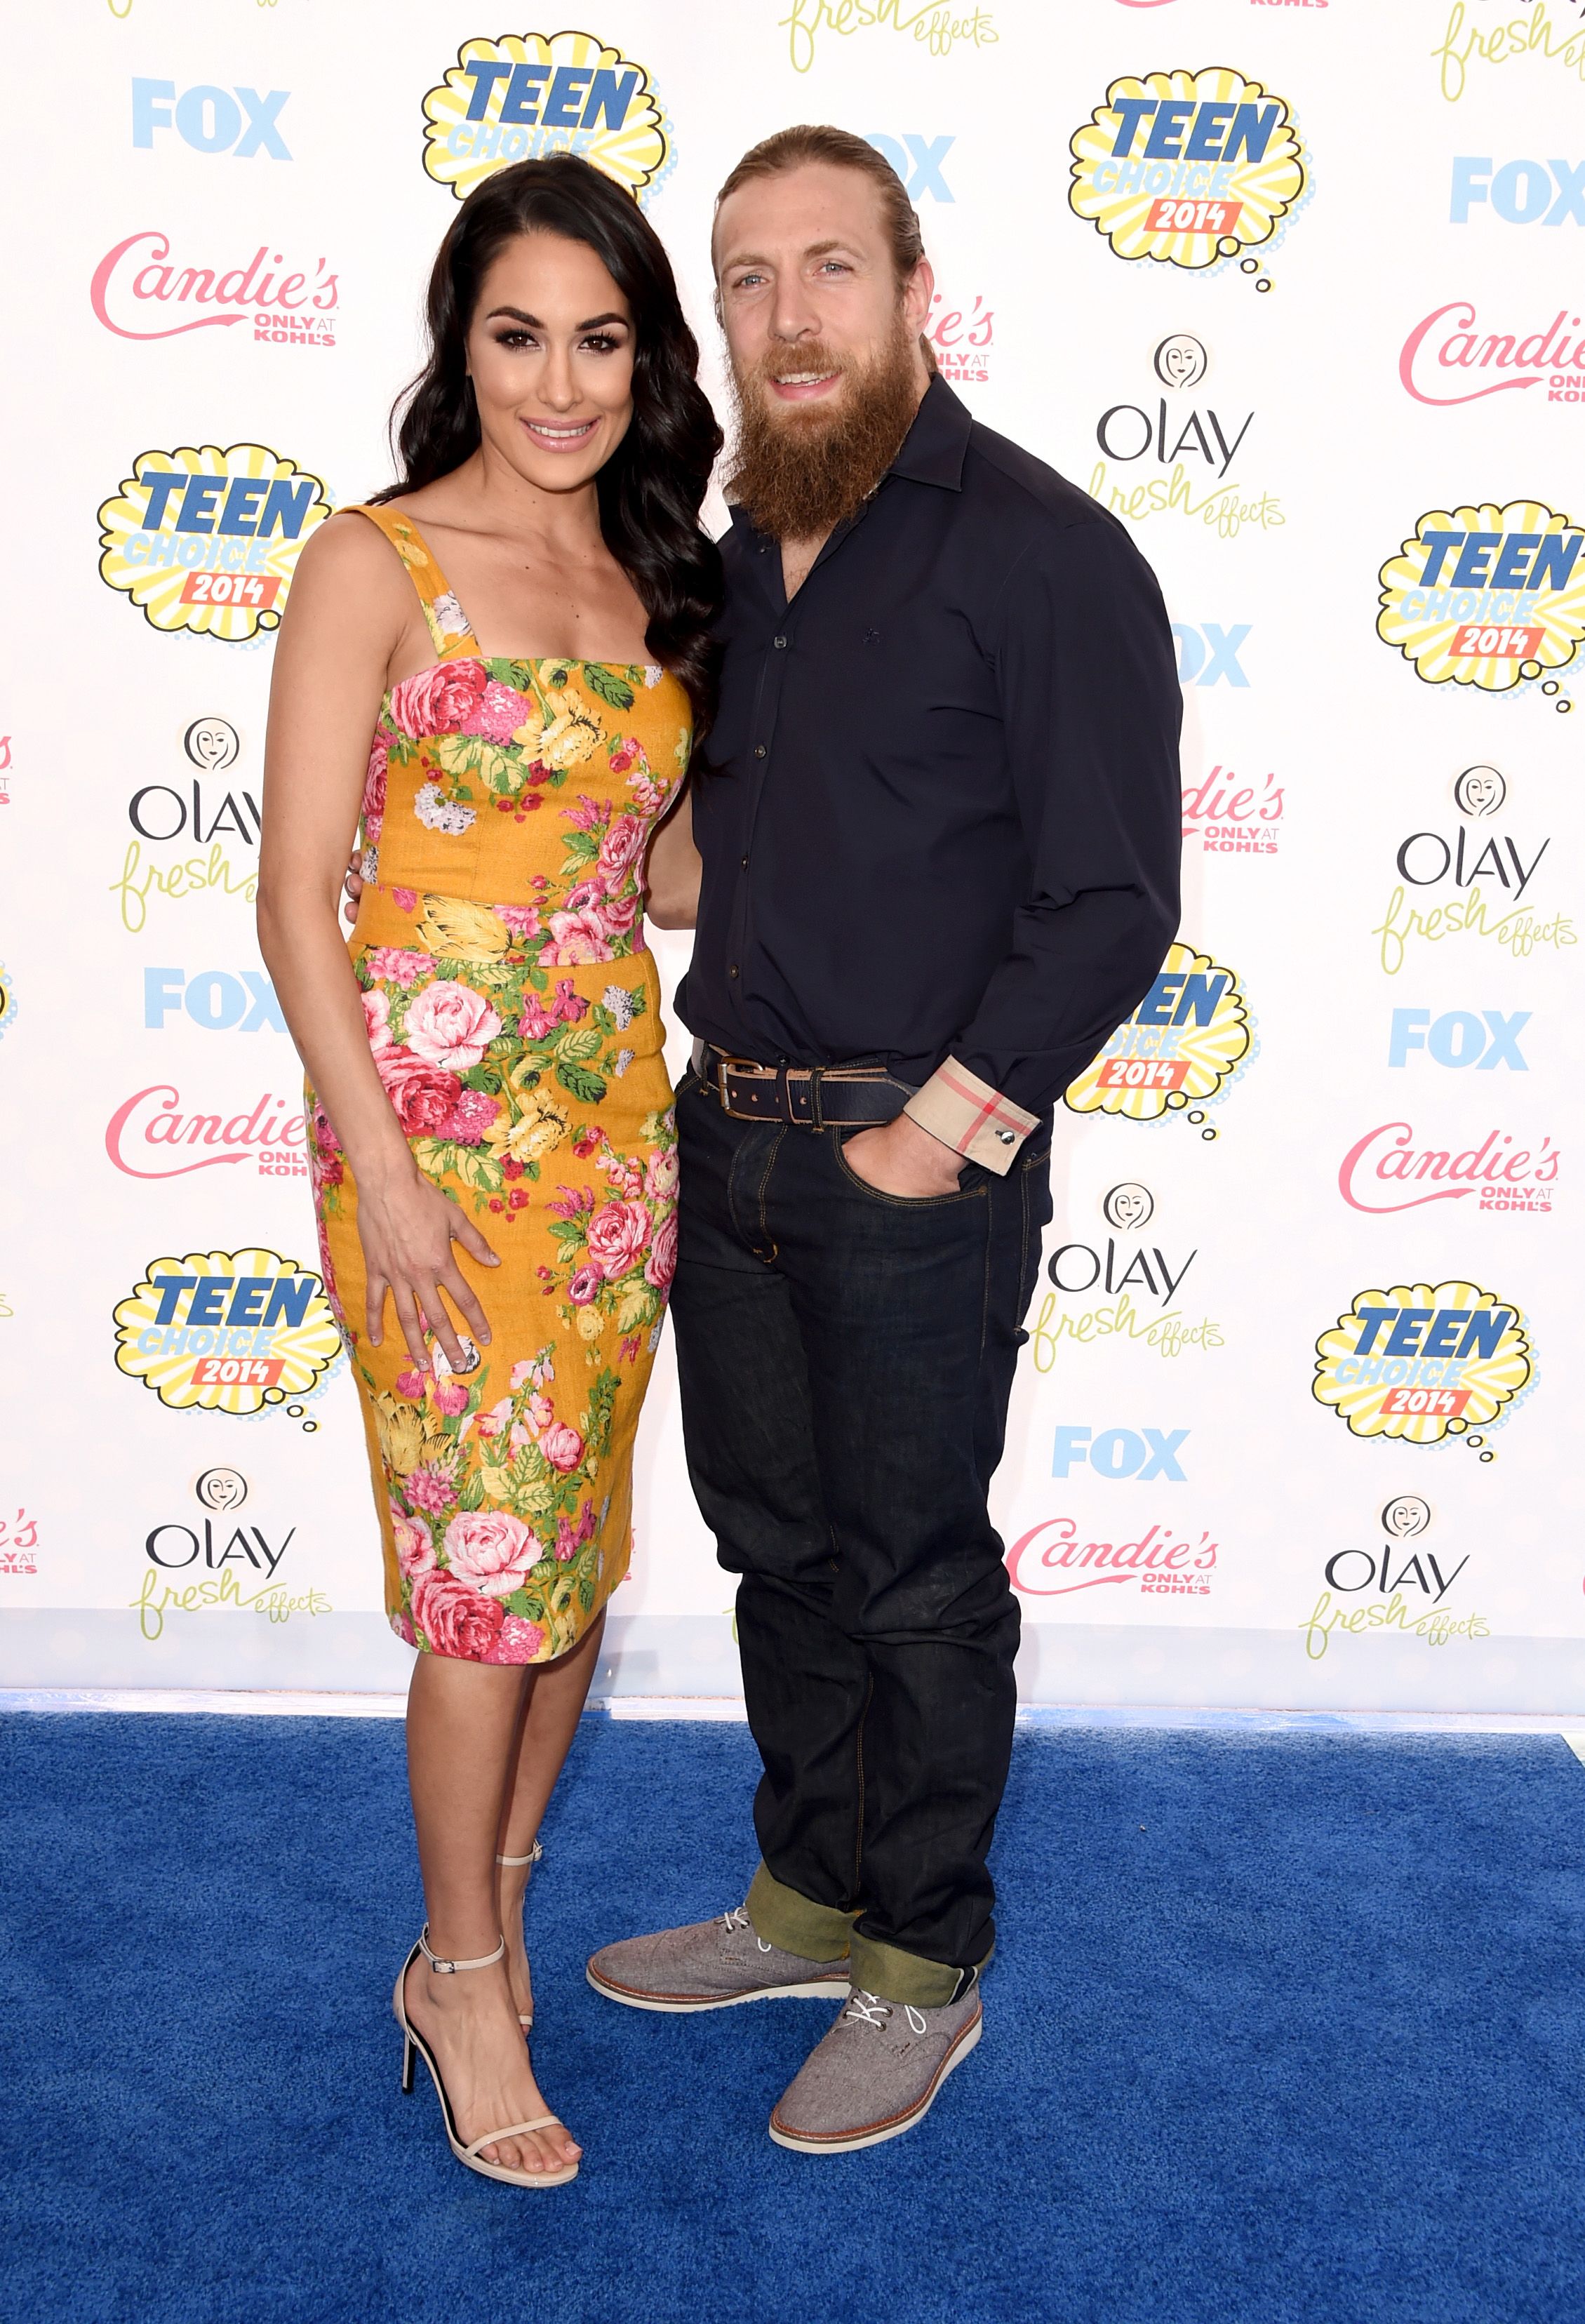 WWE Diva Brie Bella and WWE Superstar Daniel Bryan at FOX's 2014 Teen Choice Awards at The Shrine Auditorium on August 10, 2014 | Photo: Getty Images